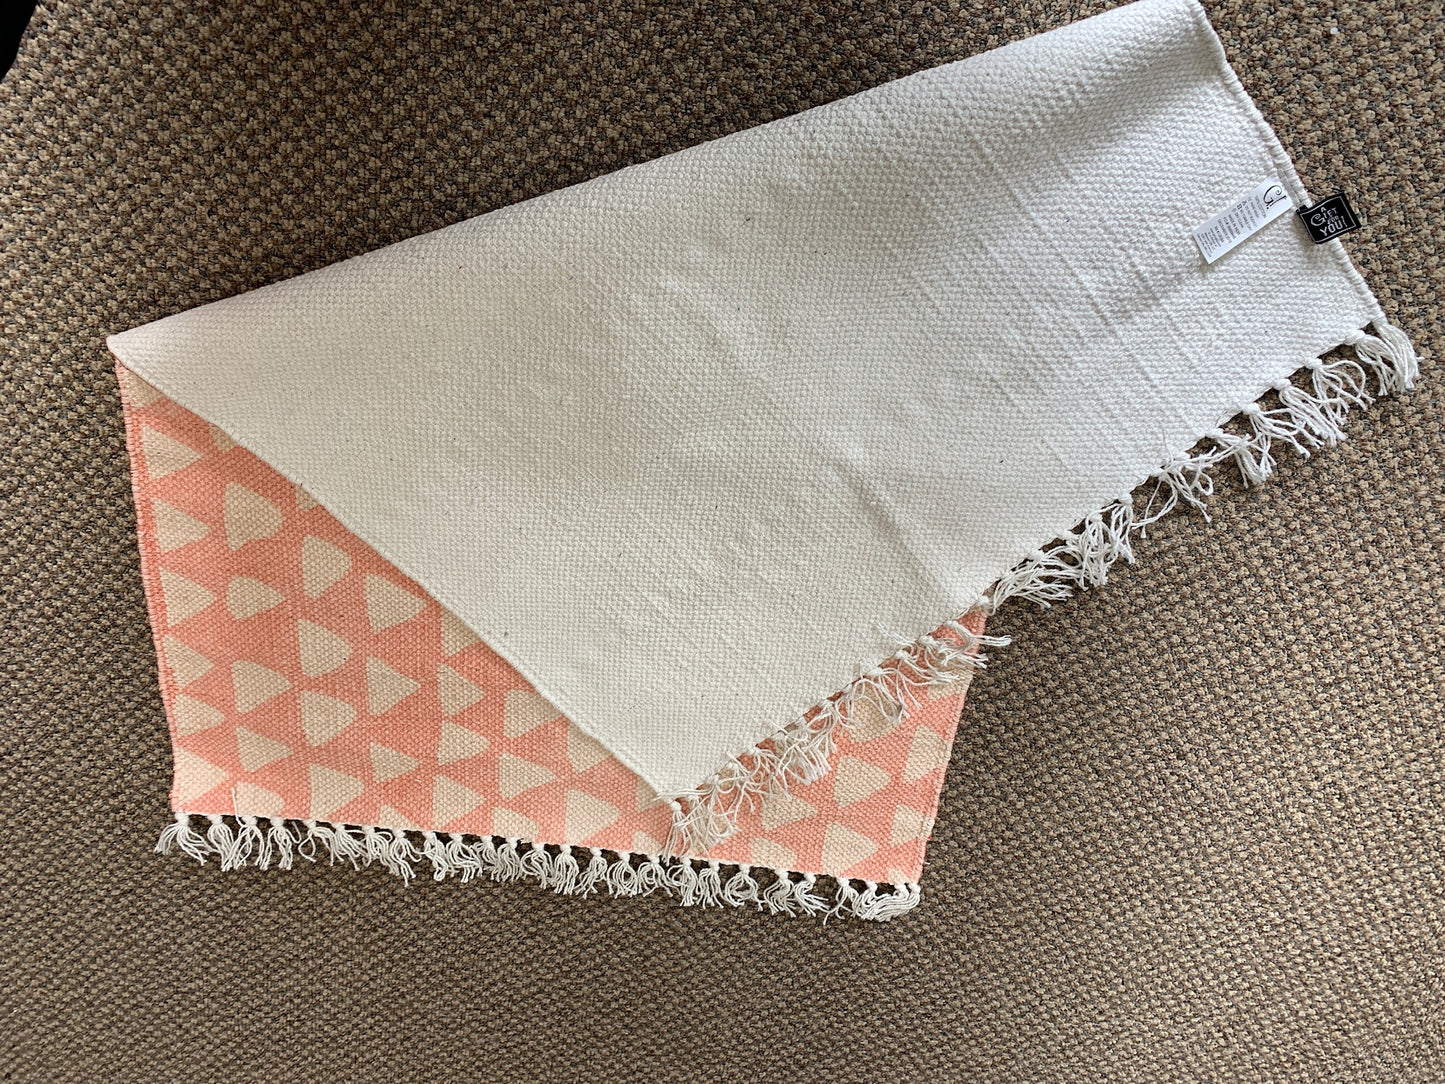 2 x 3 Pink rug with white triangles.  White Tasseled Ends